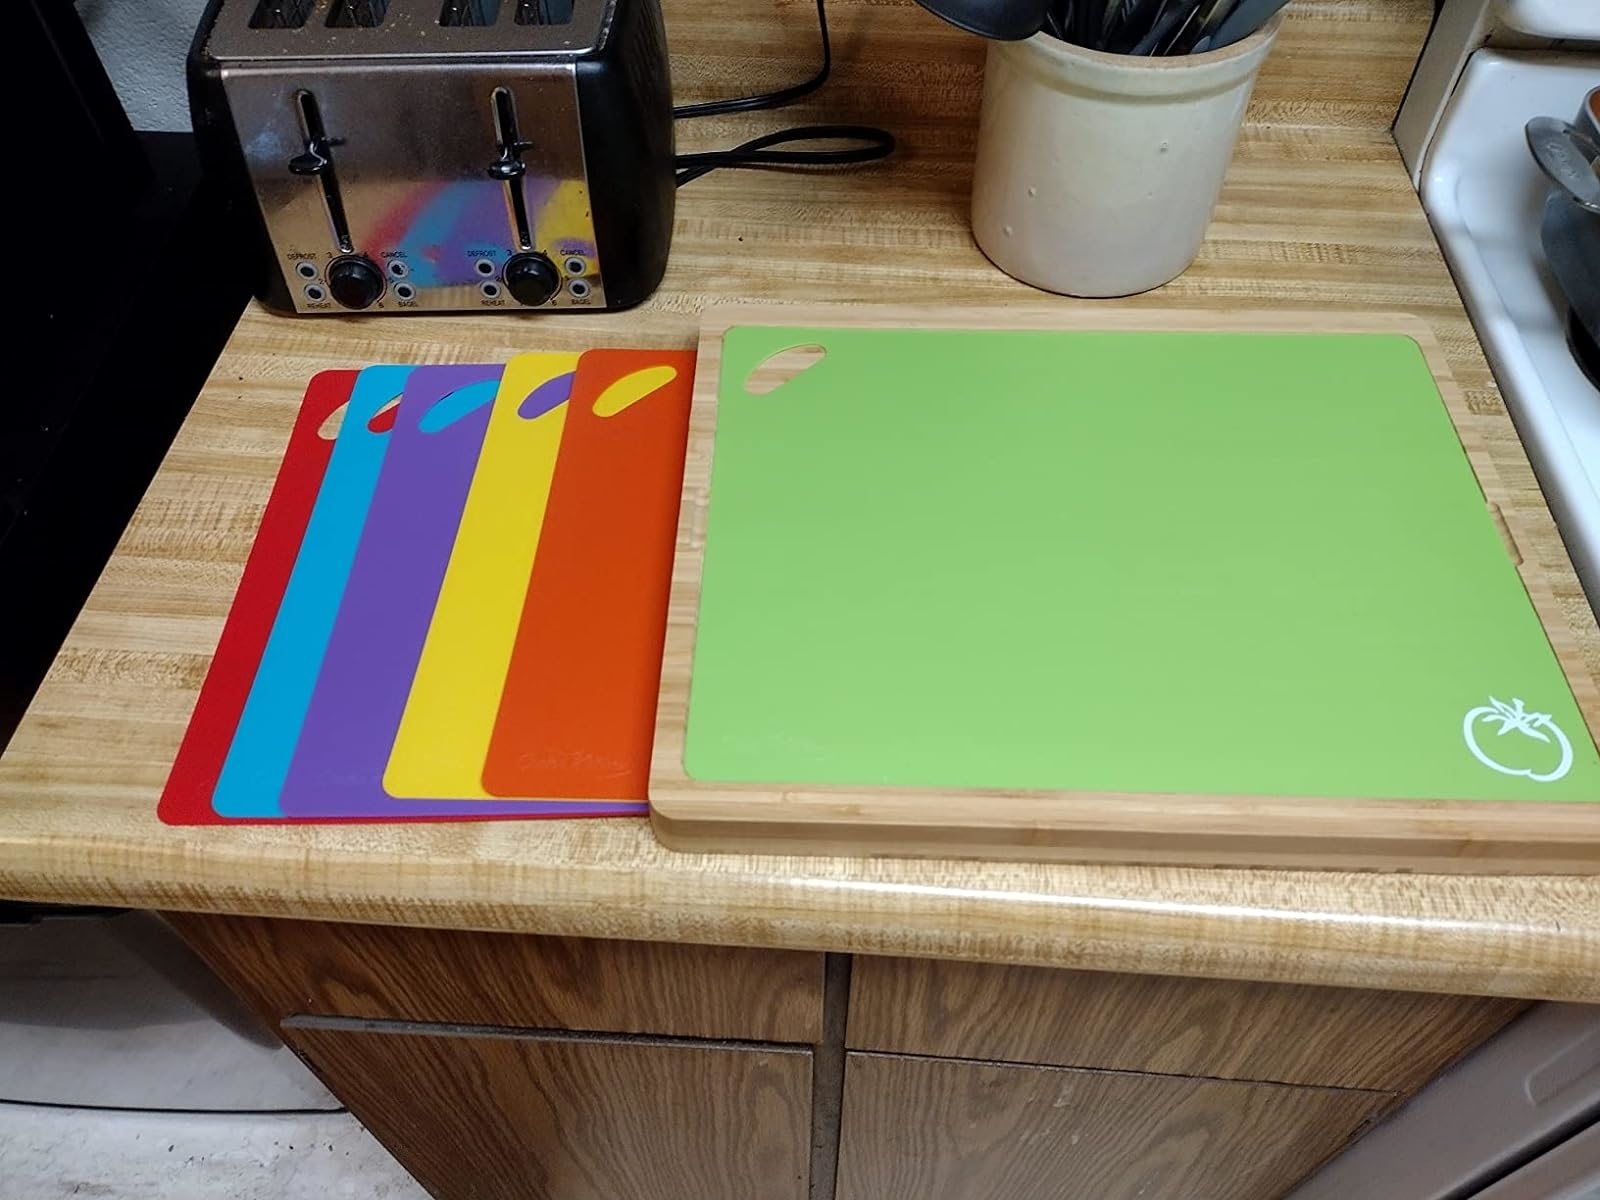 A set of multicolored cutting boards on a kitchen counter next to a green cutting mat with an apple logo